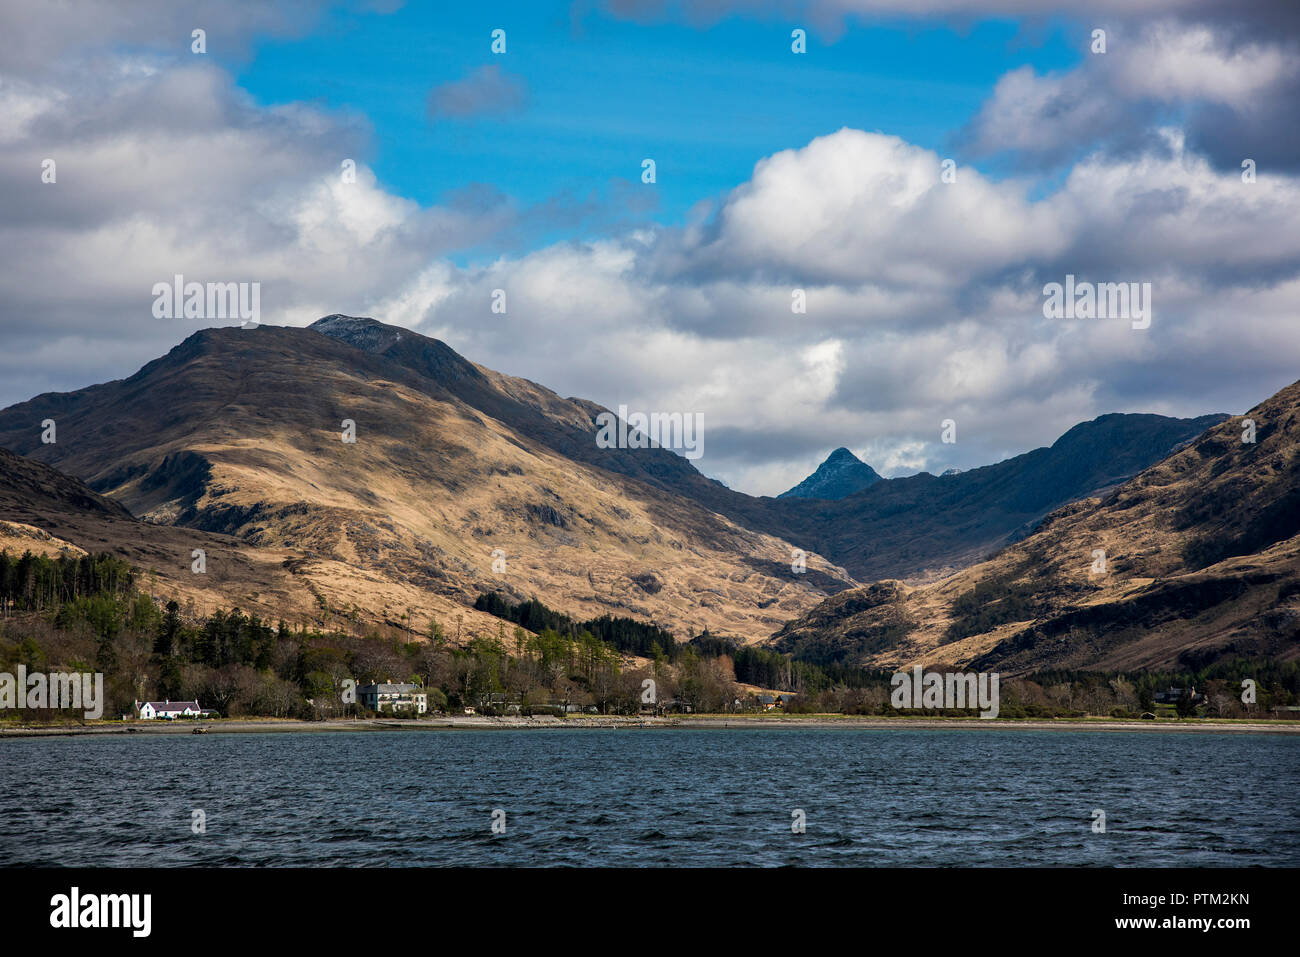 The tiny village of Inverie on Loch Nevis in the remote wilderness of the Knoydart Peninsular in Scotland. Stock Photo